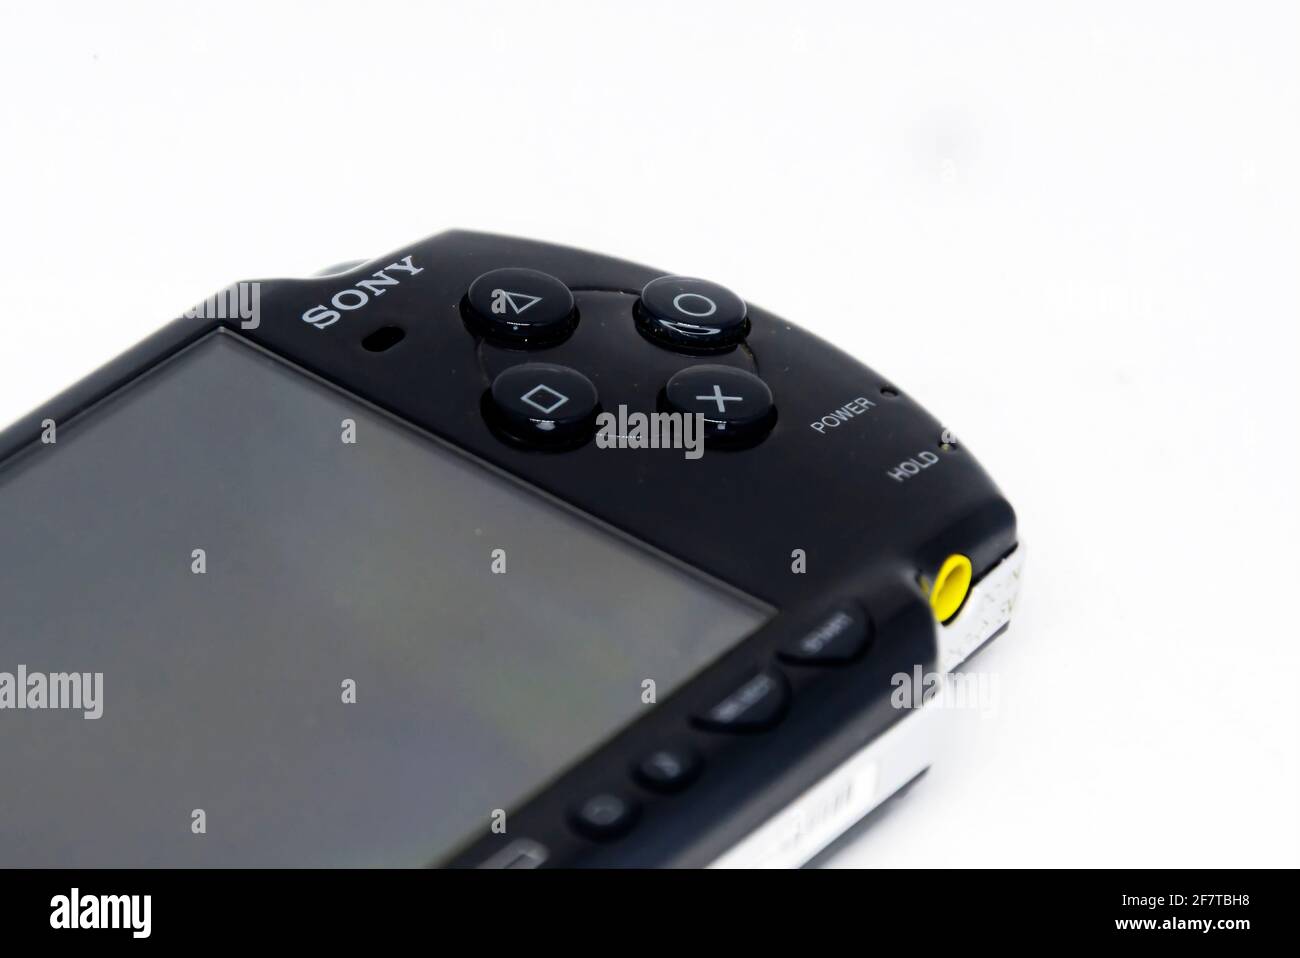 Rome, Italy, April 9th 2021: Side view of a Sony PlayStation Portable (PSP). PSP is a handheld game console developed and marketed by Sony. Stock Photo